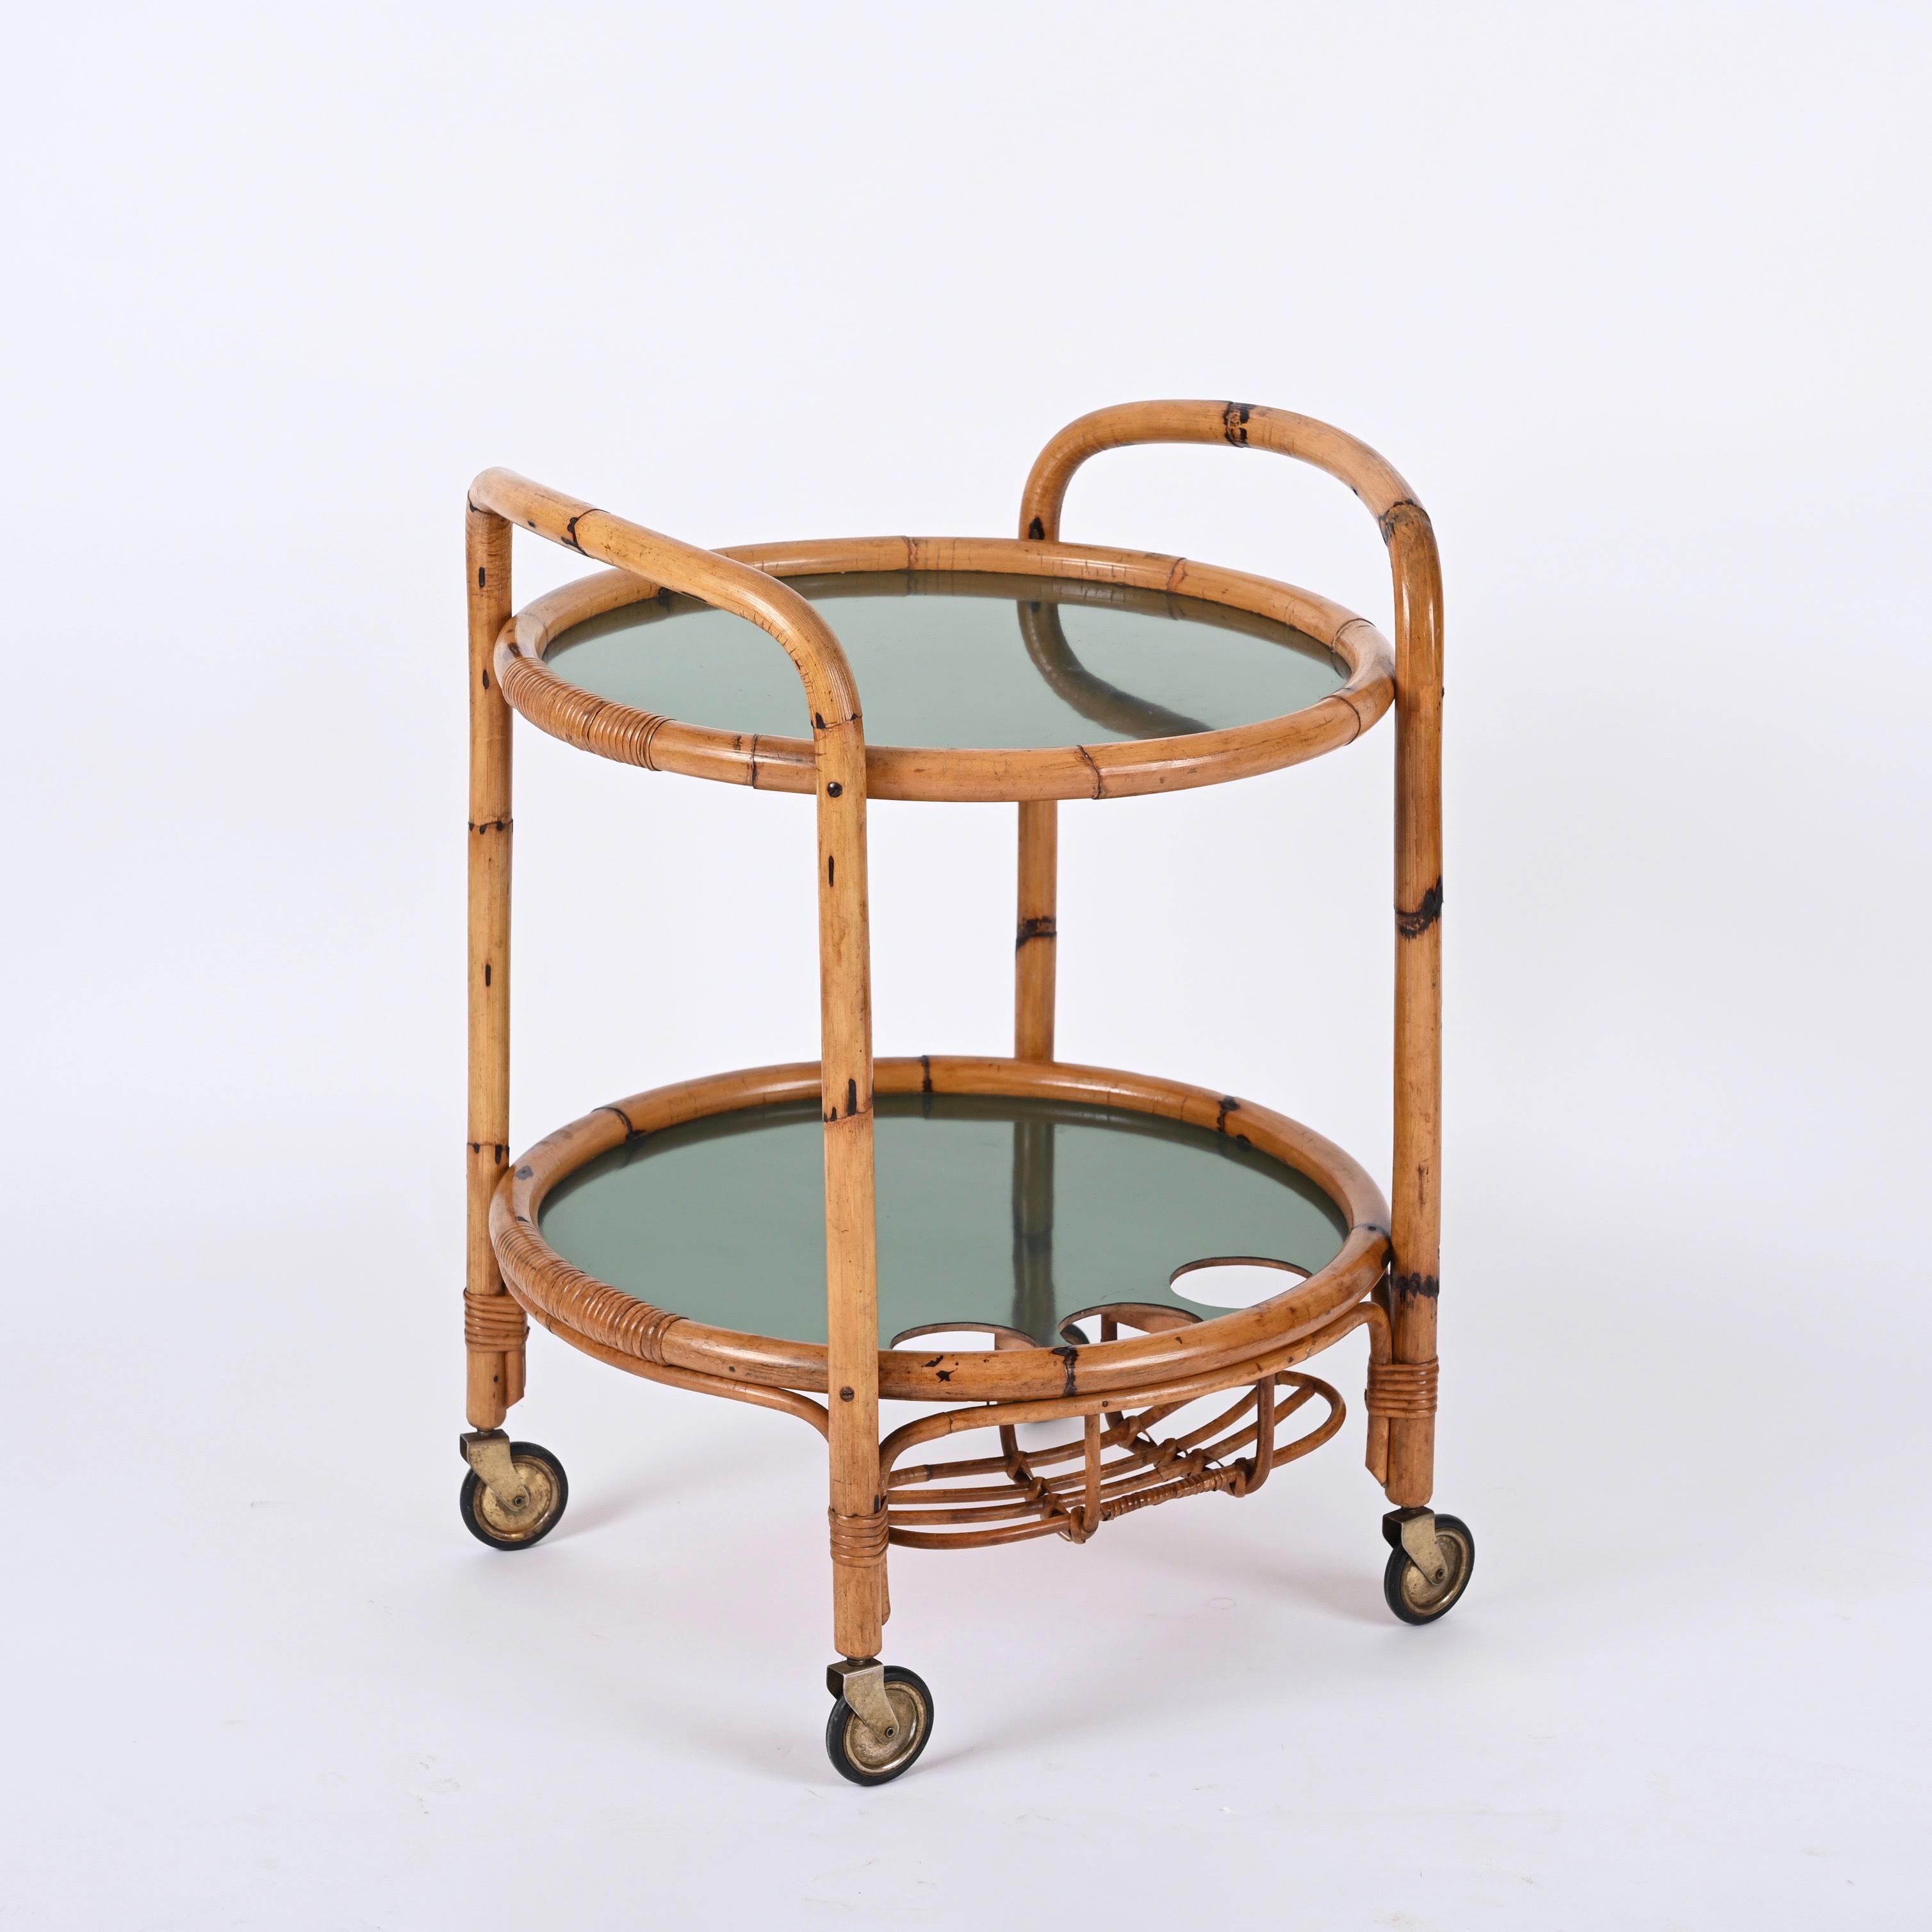 Midcentury Bar Serving Cart in Bamboo, Rattan and Green Formica, Italy, 1970s For Sale 5